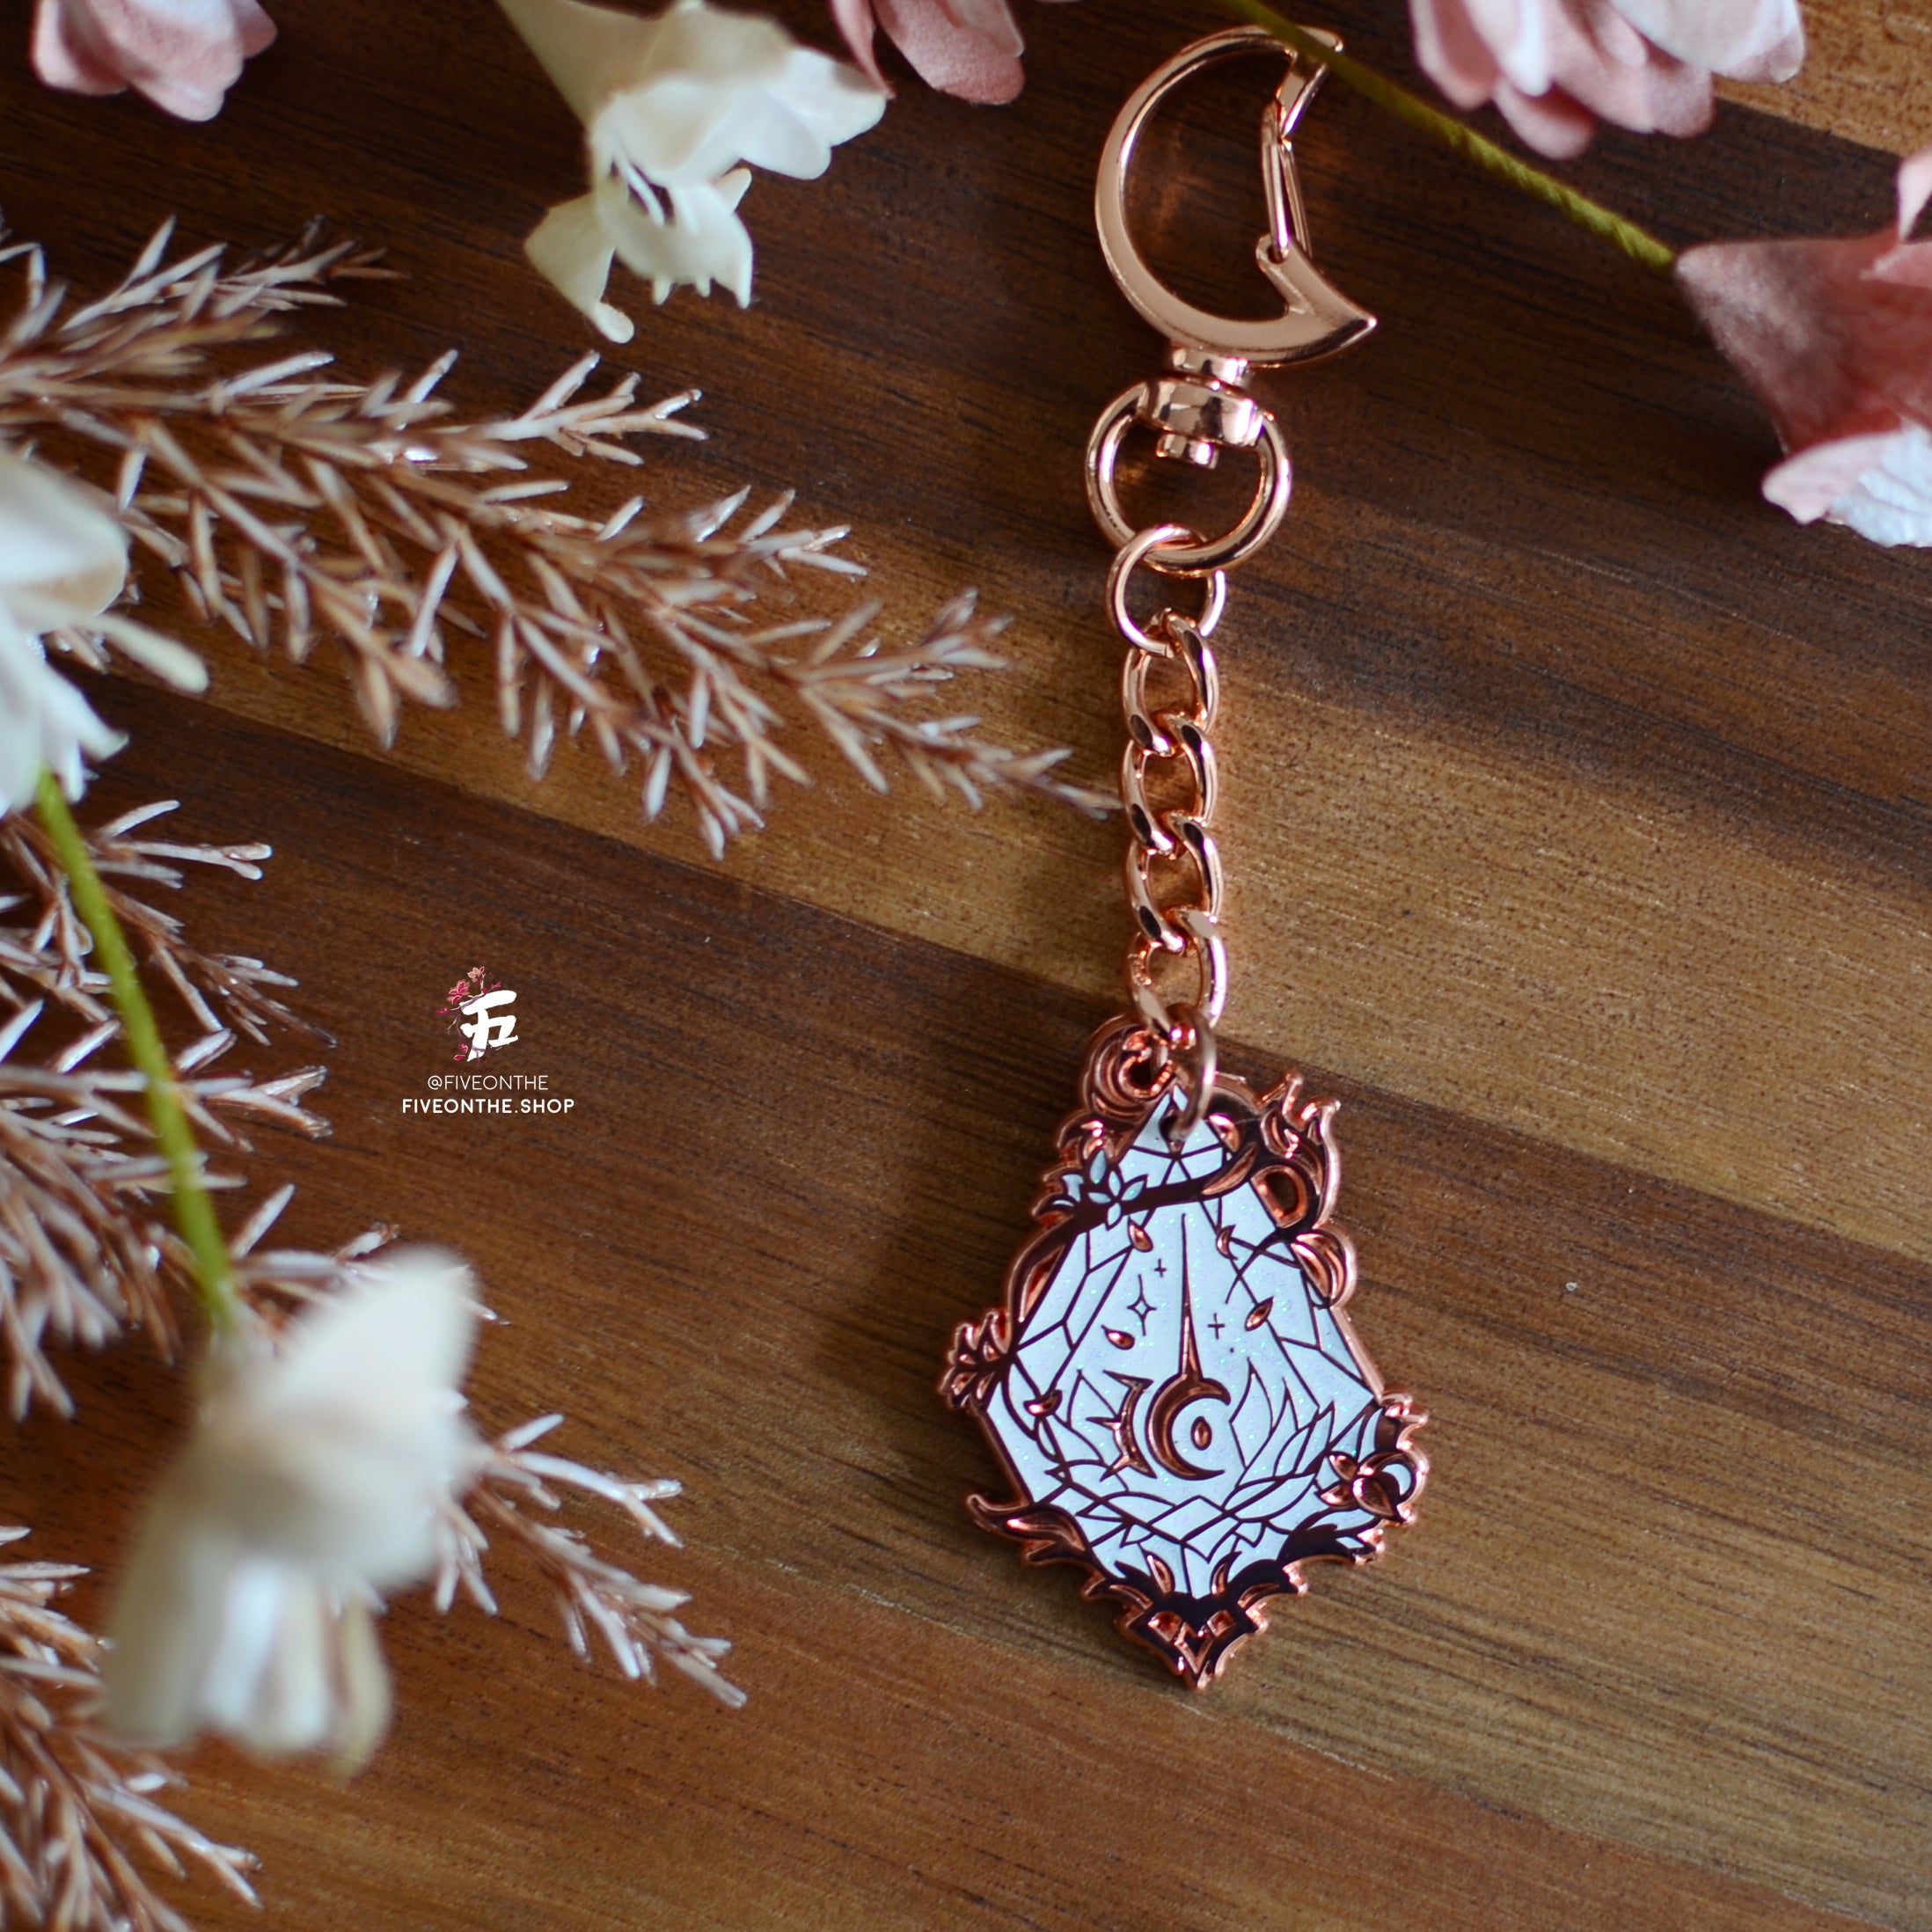 Red Mage VARIANT ✦ FFXIV Soul Crystal Job Charms